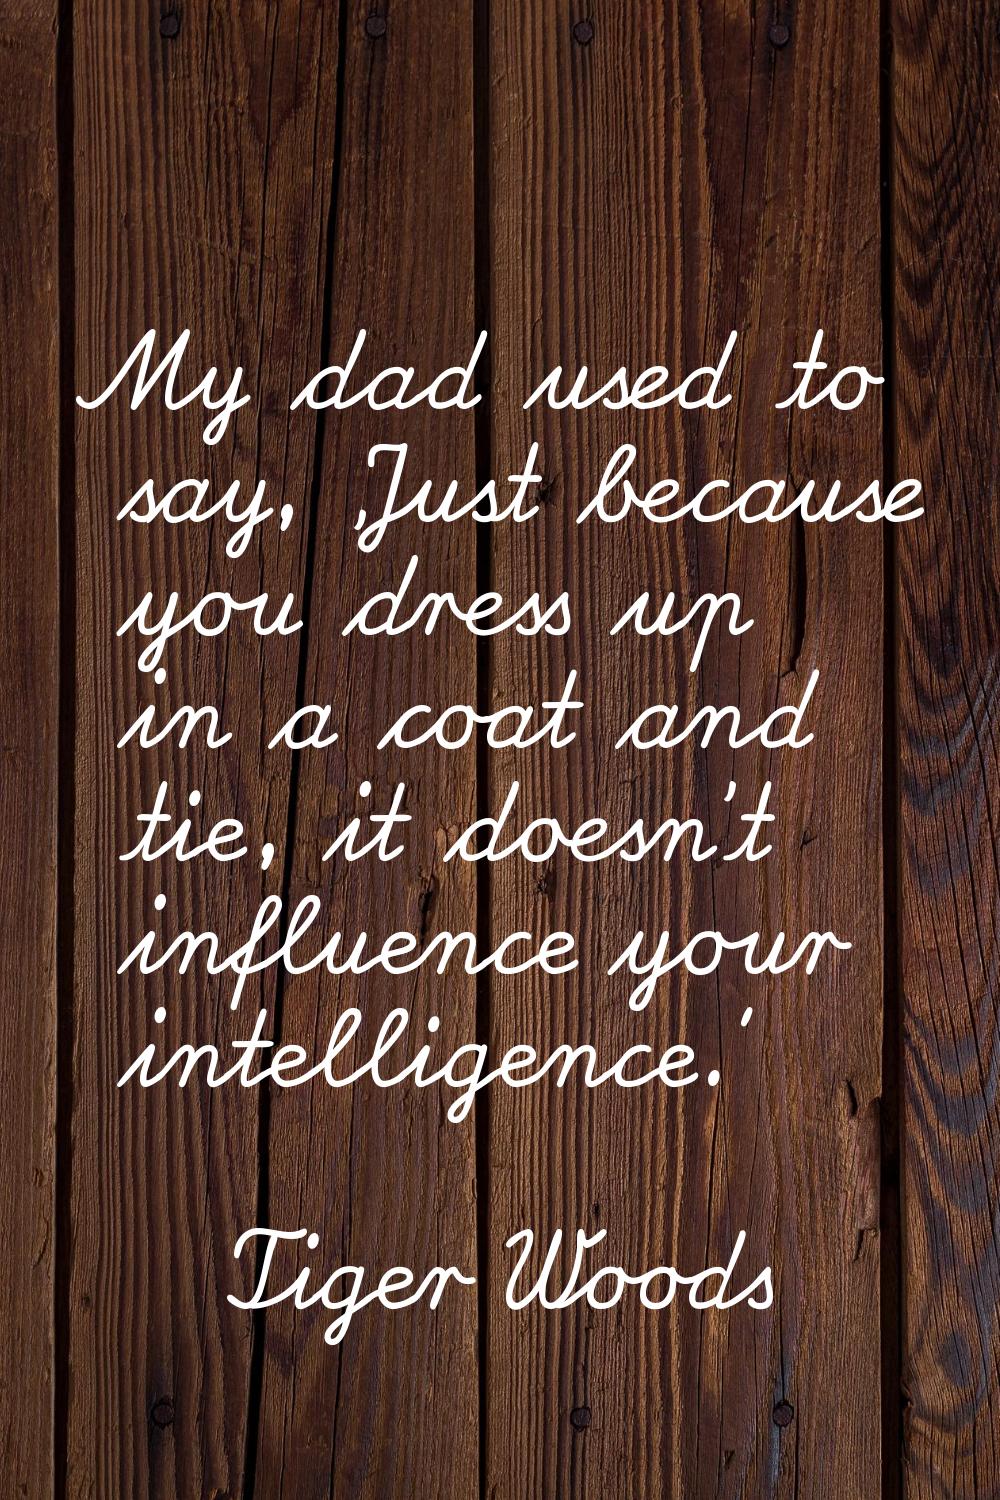 My dad used to say, 'Just because you dress up in a coat and tie, it doesn't influence your intelli